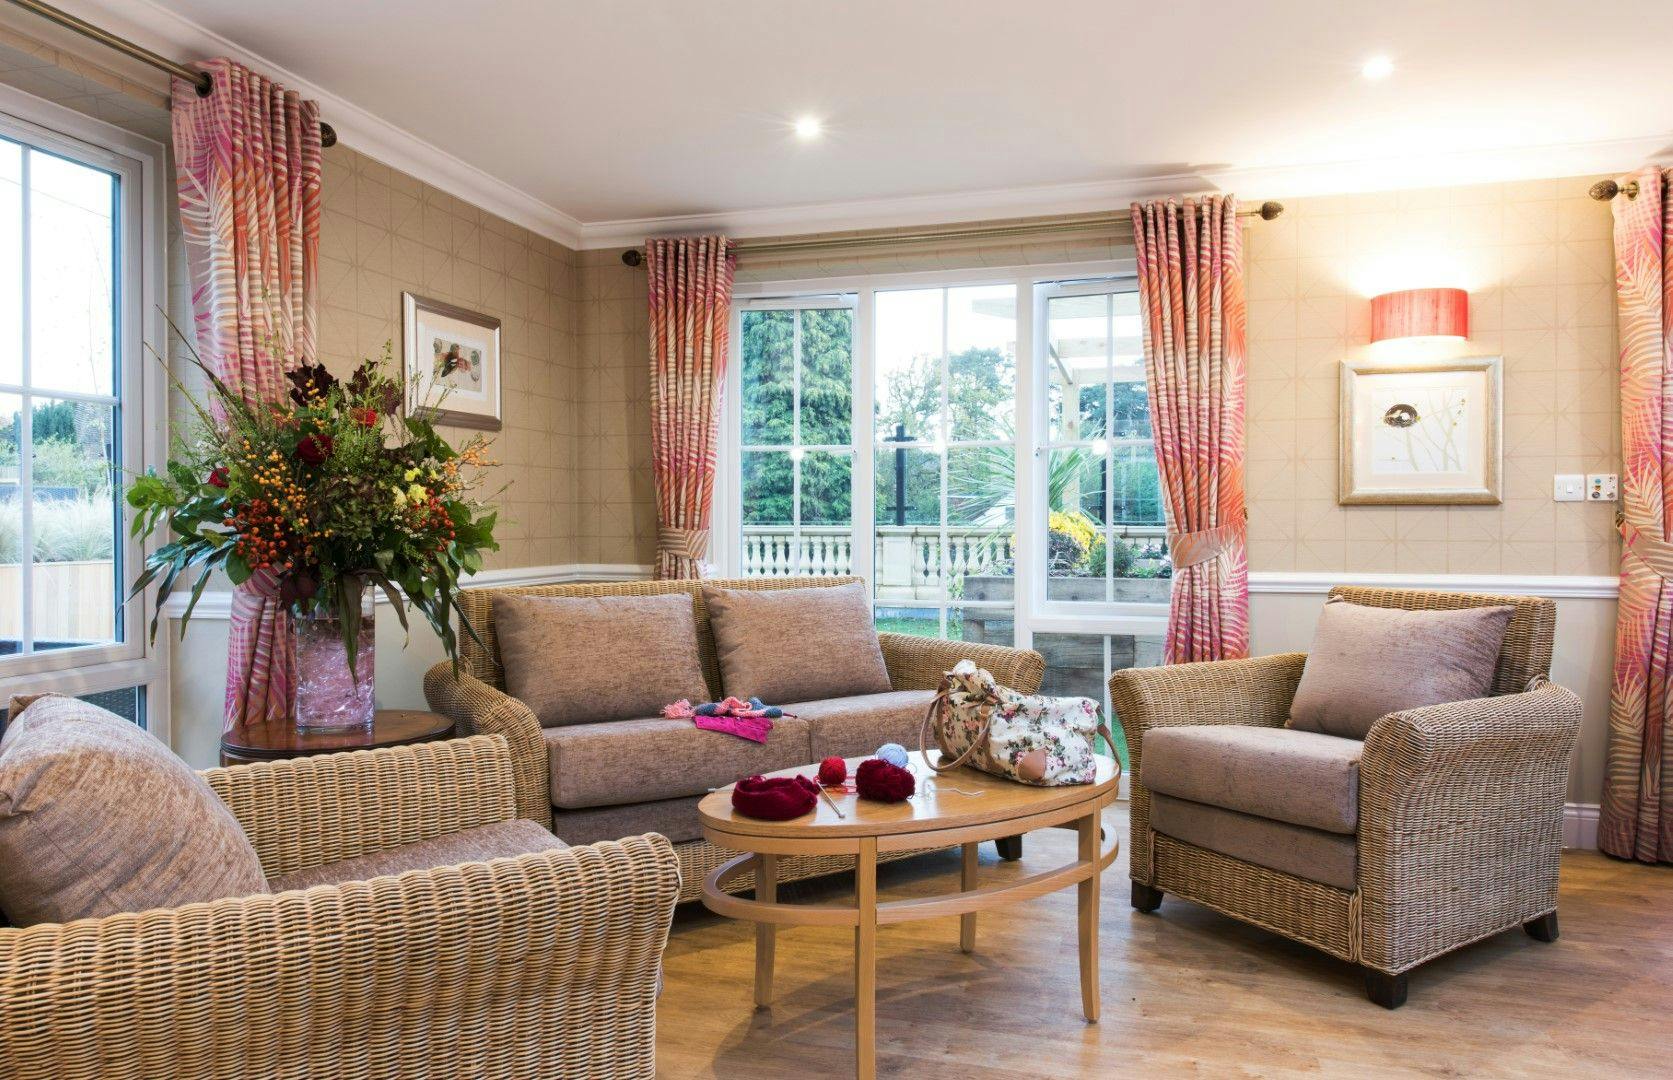 Communal Area at Lakeview Care Home in Surrey, South East England